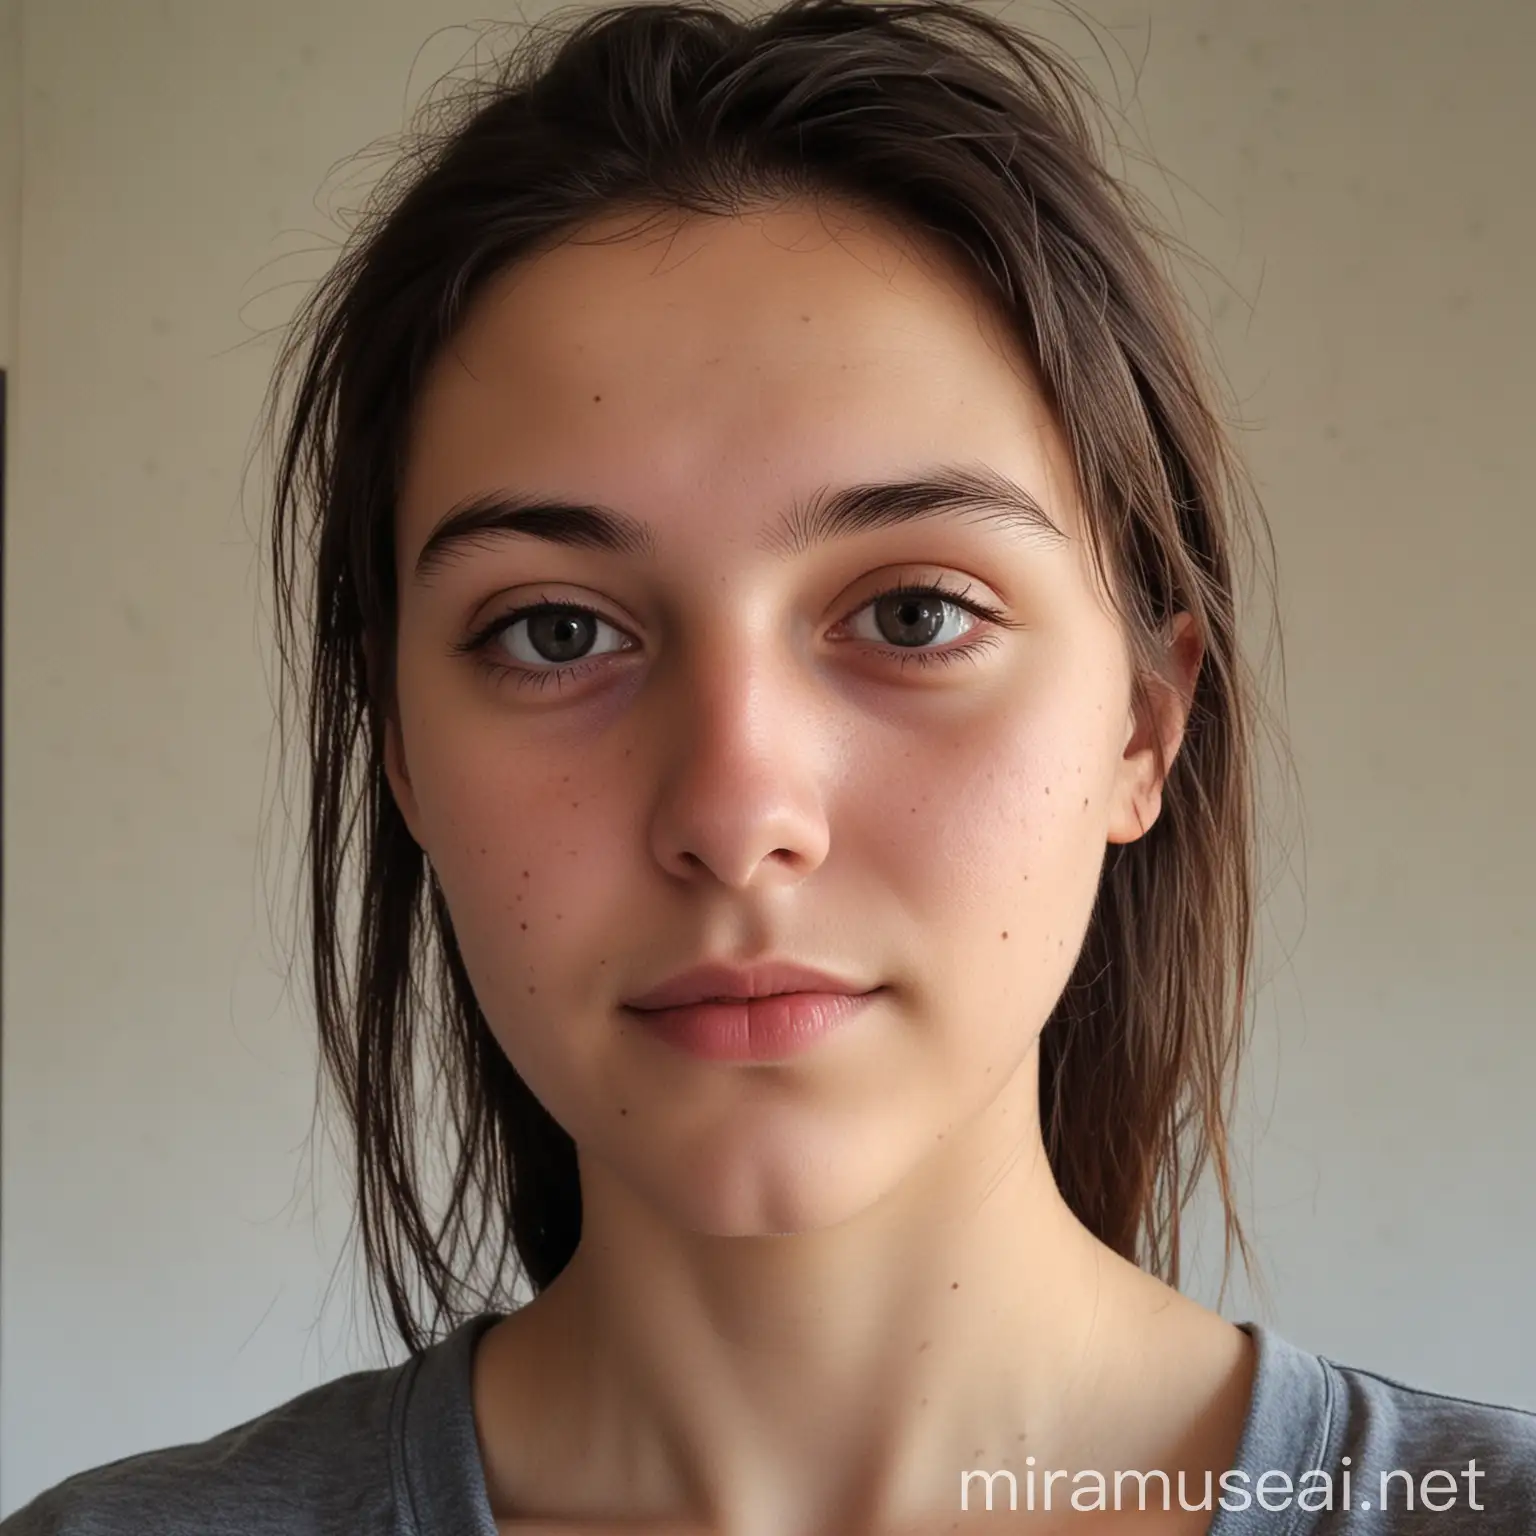 Young Woman from the Neighborhood 22 Years Old Without Makeup